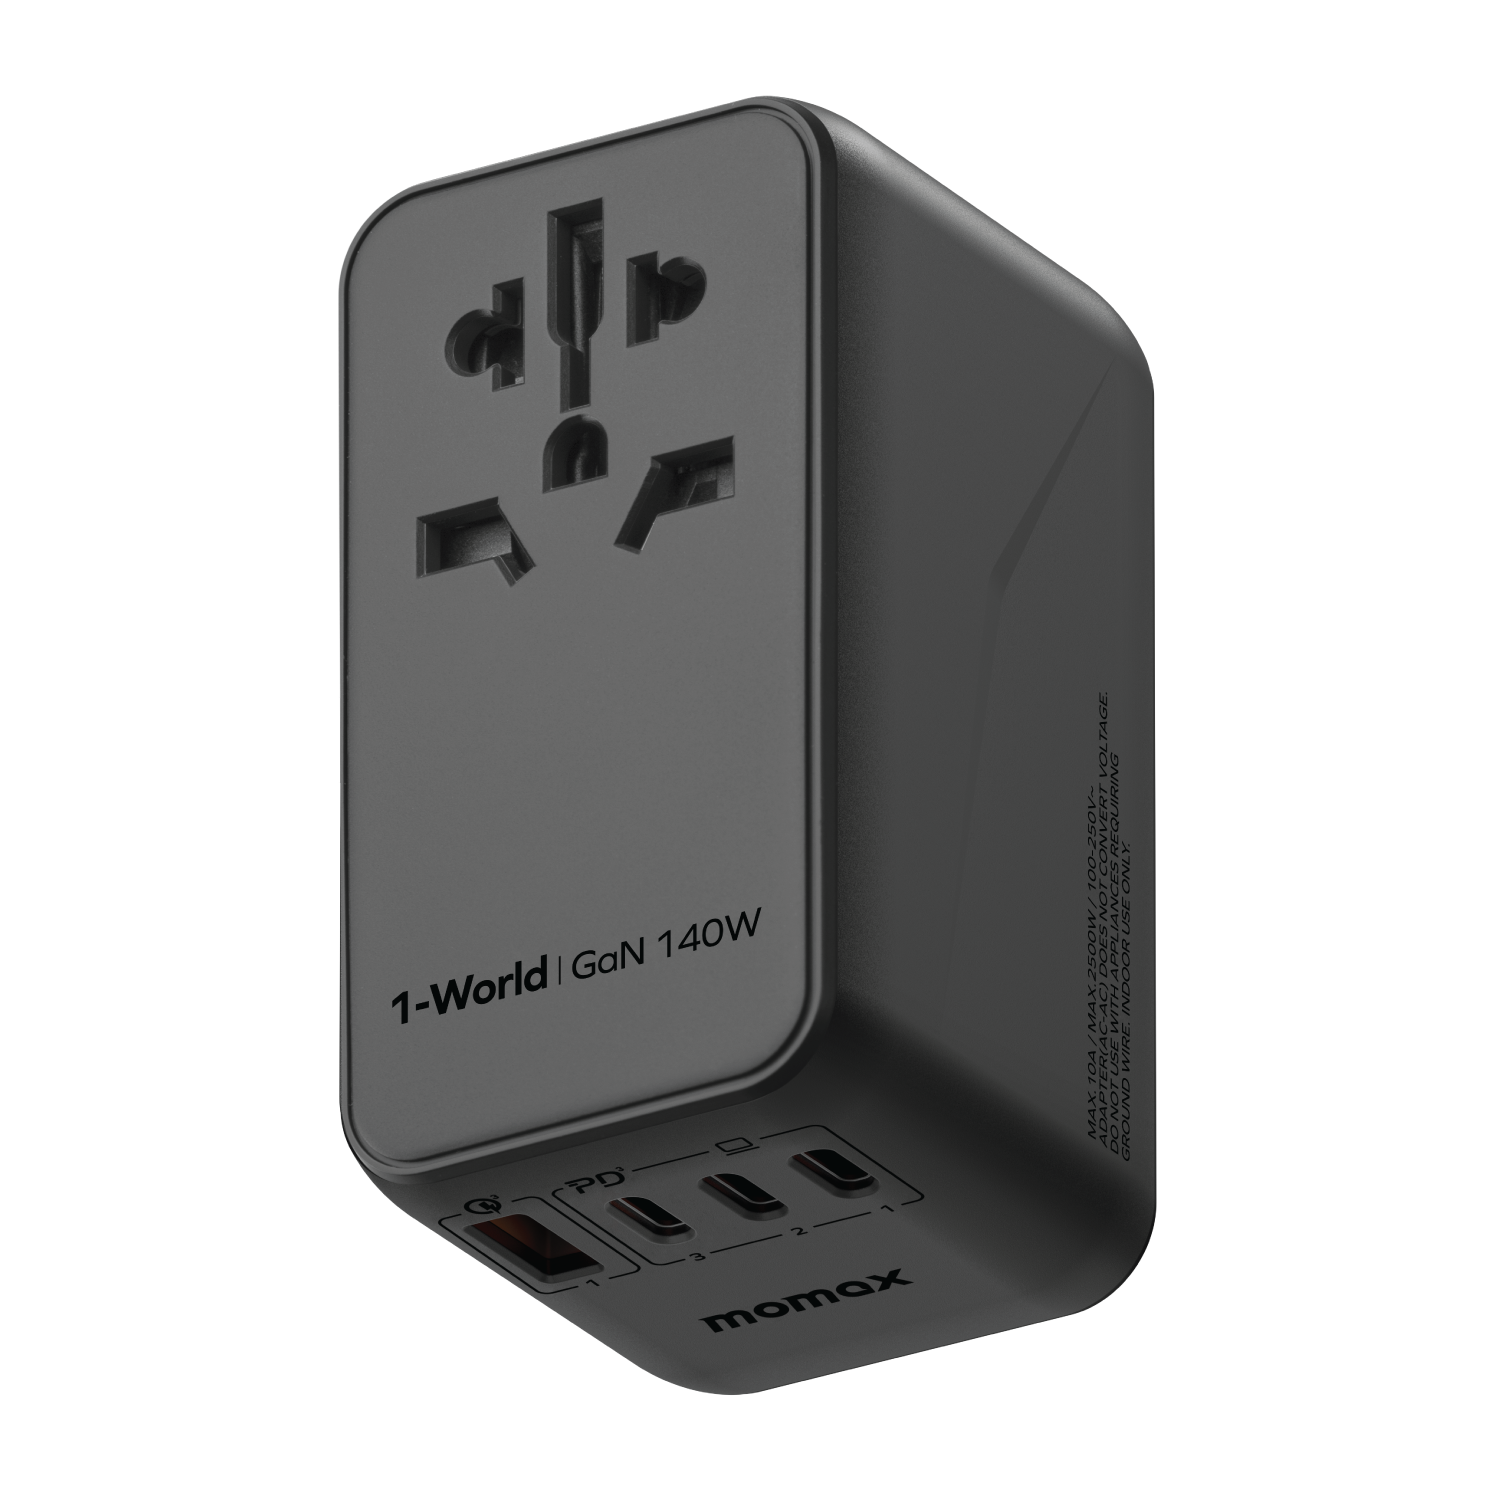 1-World | Universal 4-Ports Travel Charger (GaN 140W + USB-C Cable)